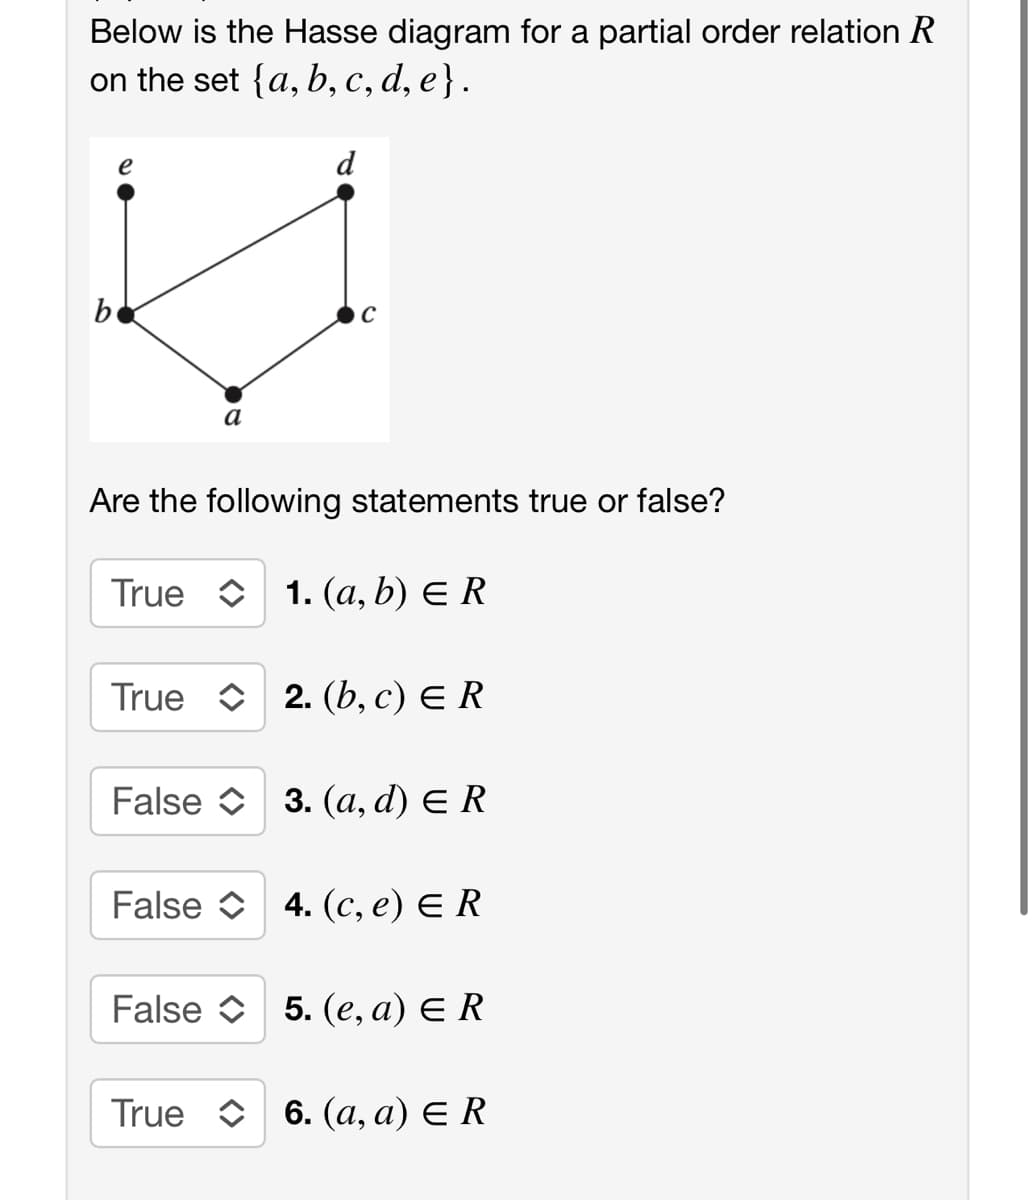 Below is the Hasse diagram for a partial order relation R
on the set {a, b, C, d, e}.
e
d
be
a
Are the following statements true or false?
True O 1. (a, b) E R
True O 2. (b, c) E R
False O 3. (a, d) E R
False O 4. (c, e) E R
False O 5. (e, a) E R
True O 6. (a, a) E R
